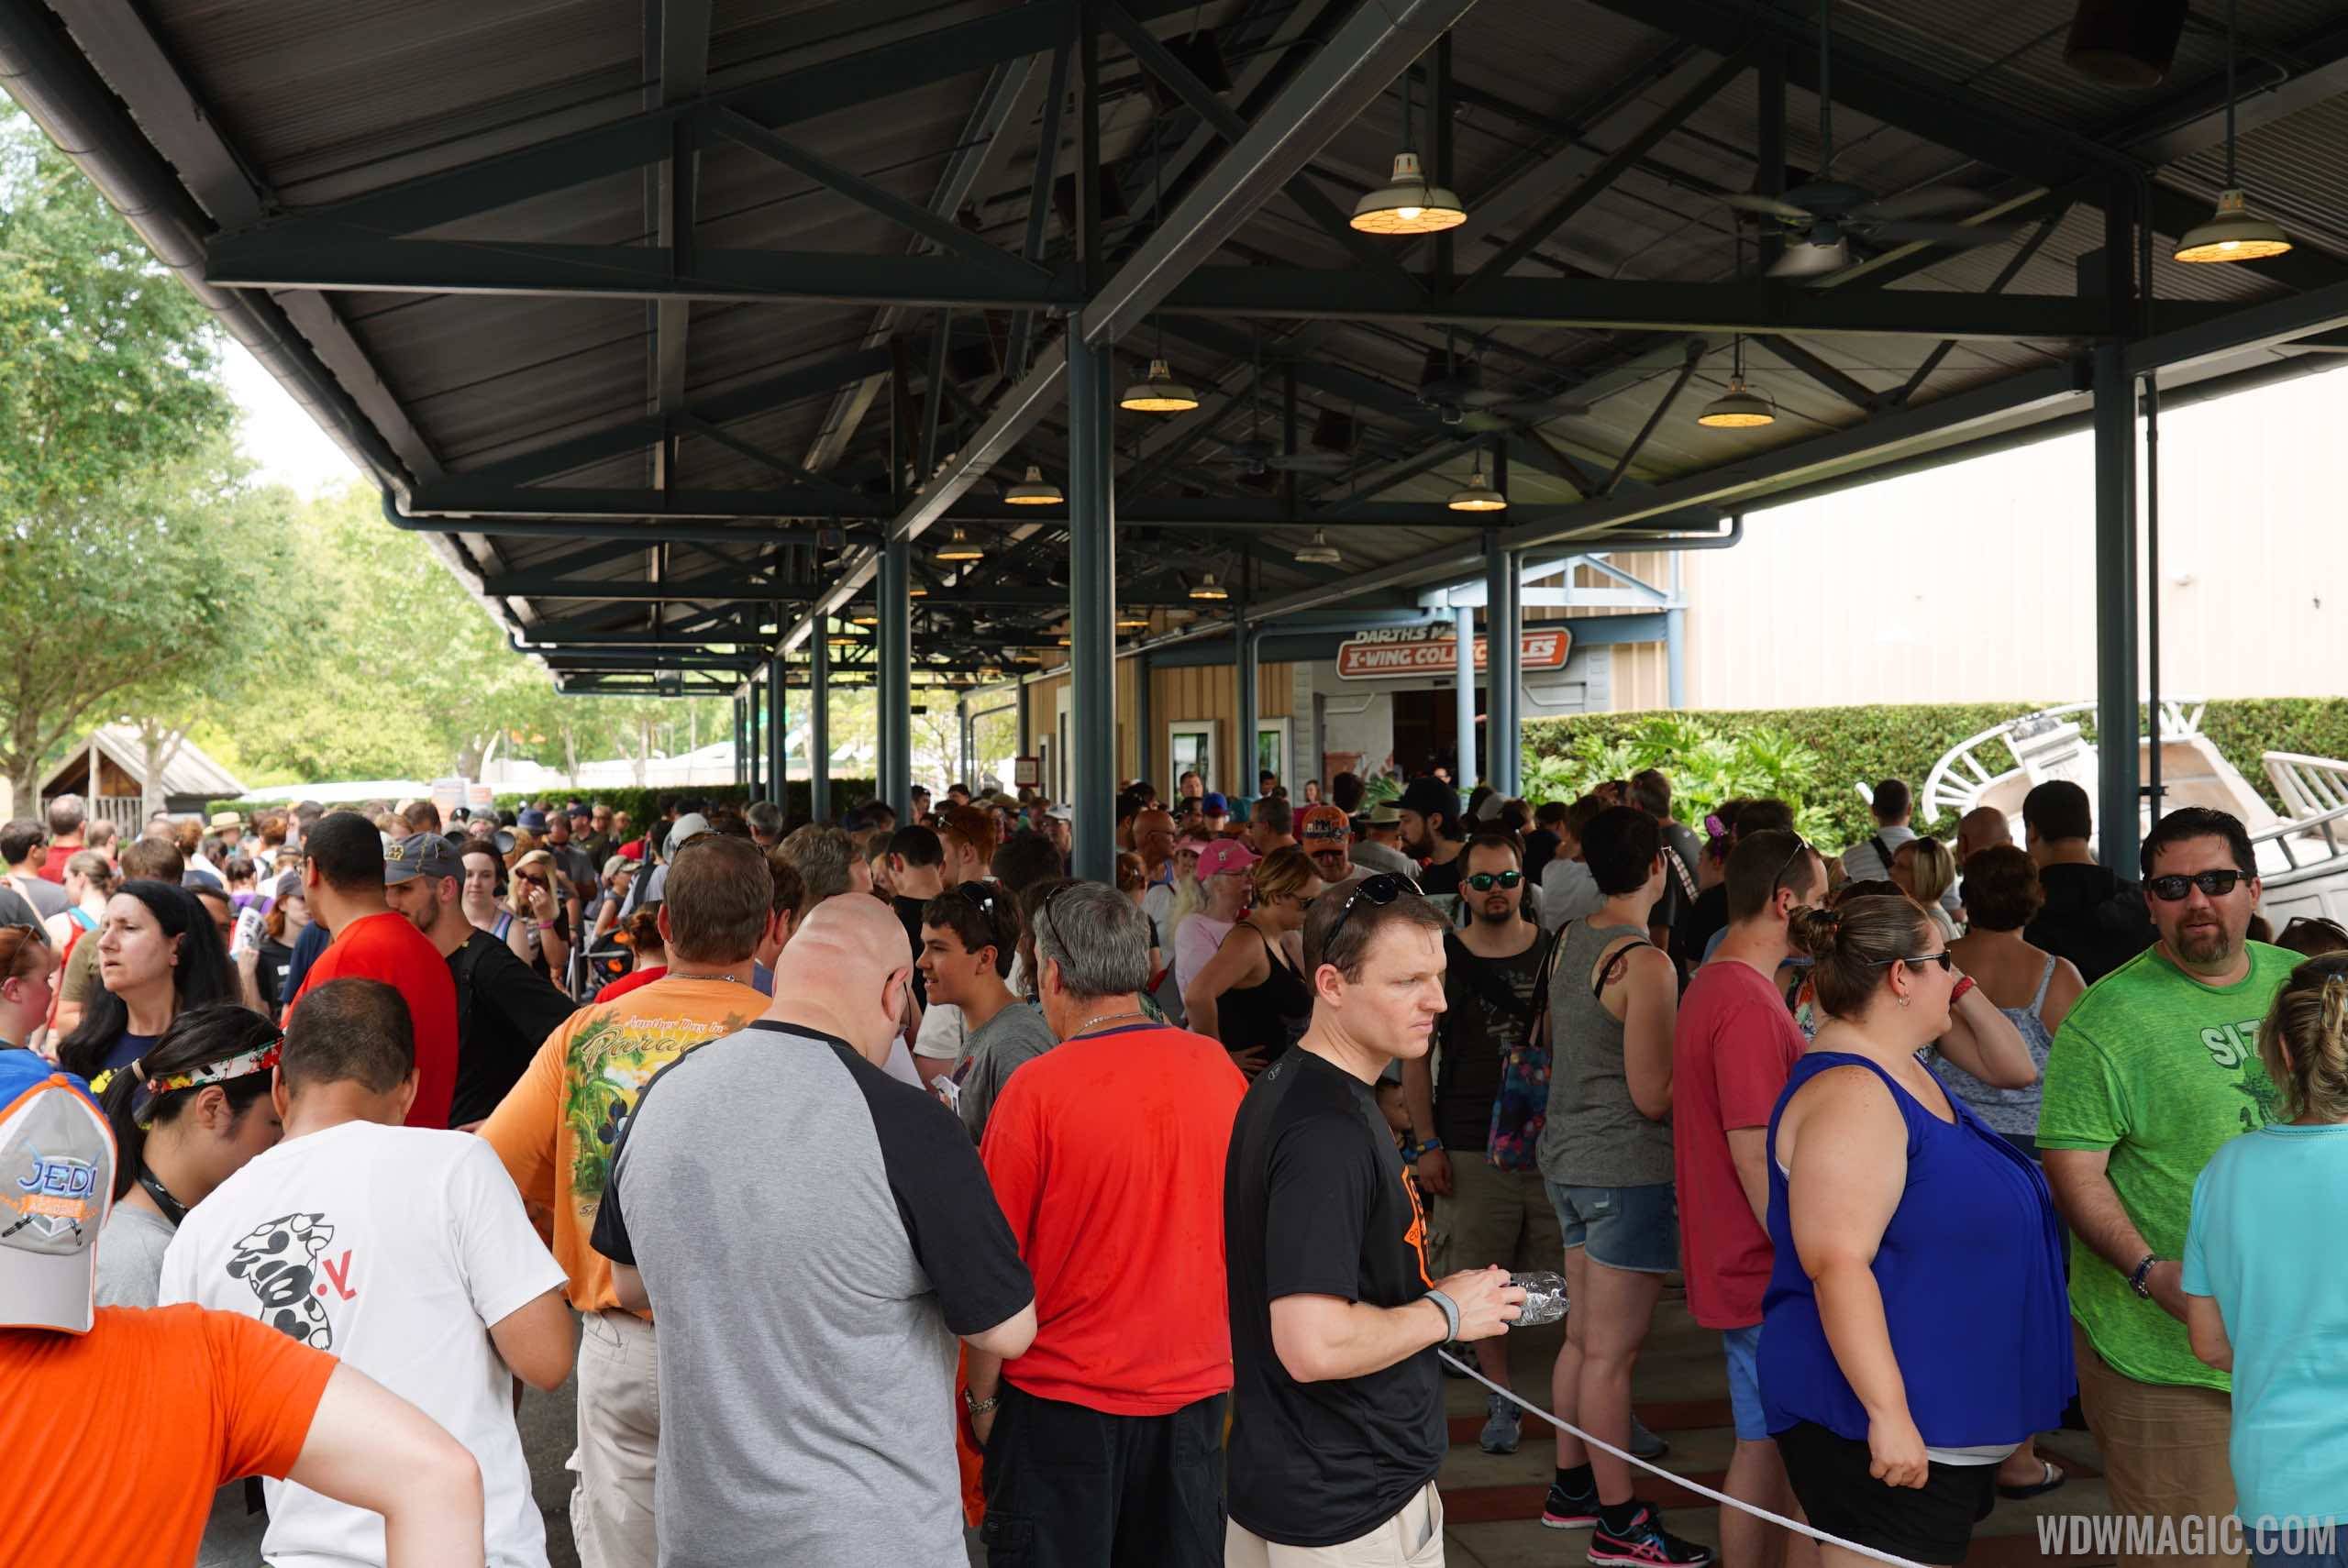 PHOTOS - Star Wars fans line up for hours to buy merchandise at Darth's Mall during Star Wars Weekends